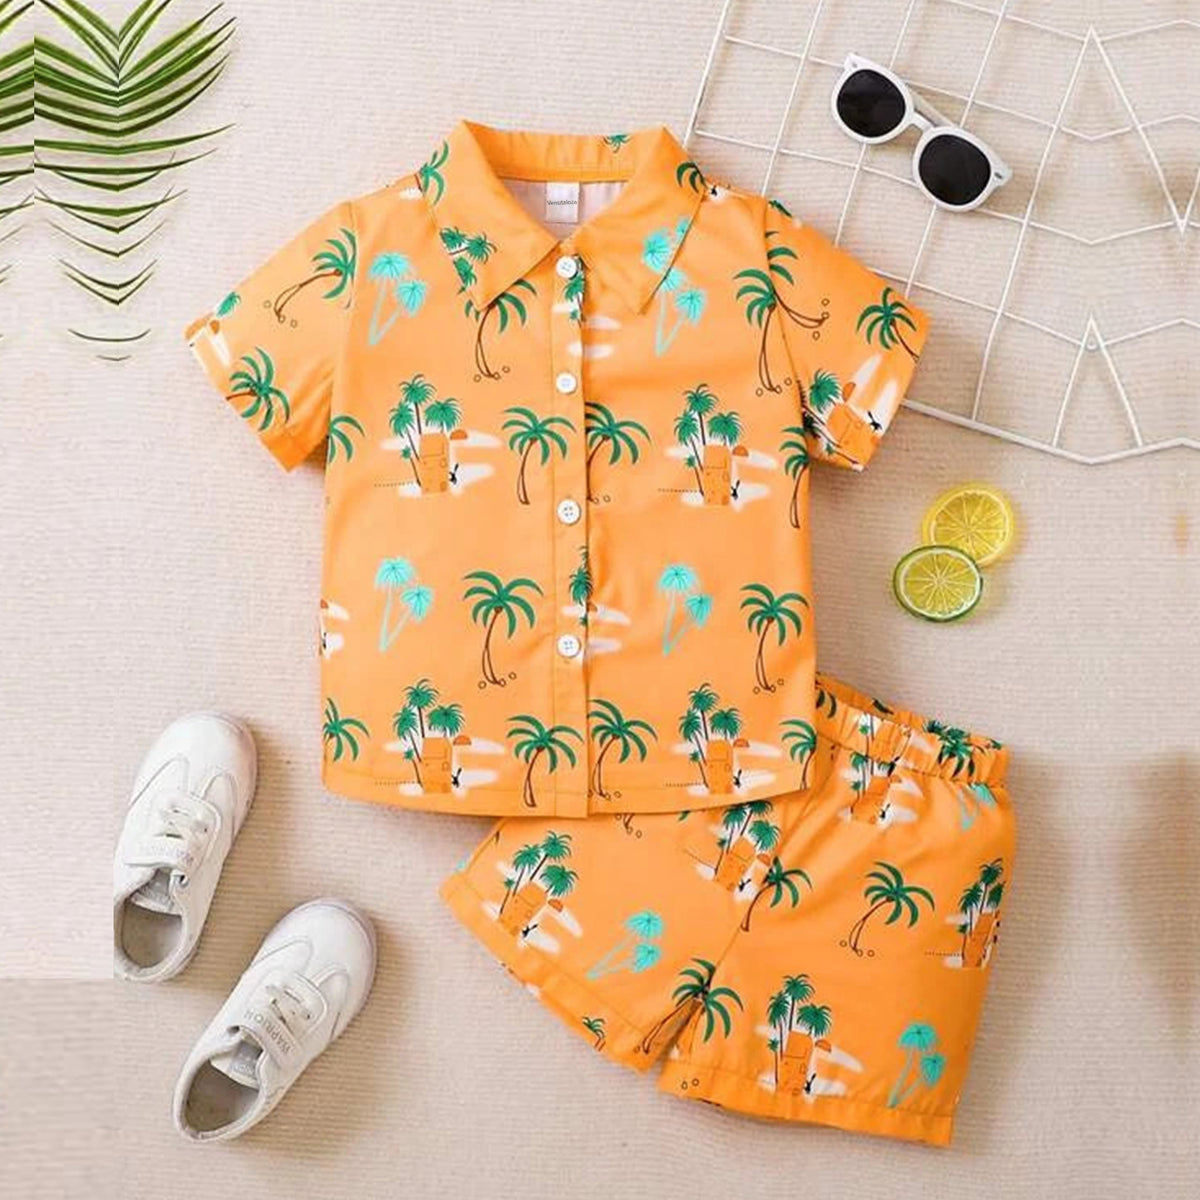 Venutaloza Baby Set Animals & Tropical Coconut (Combo Pack Of 2) Shirt & Shorts Without tee Two Piece Set For Boy & Girls..